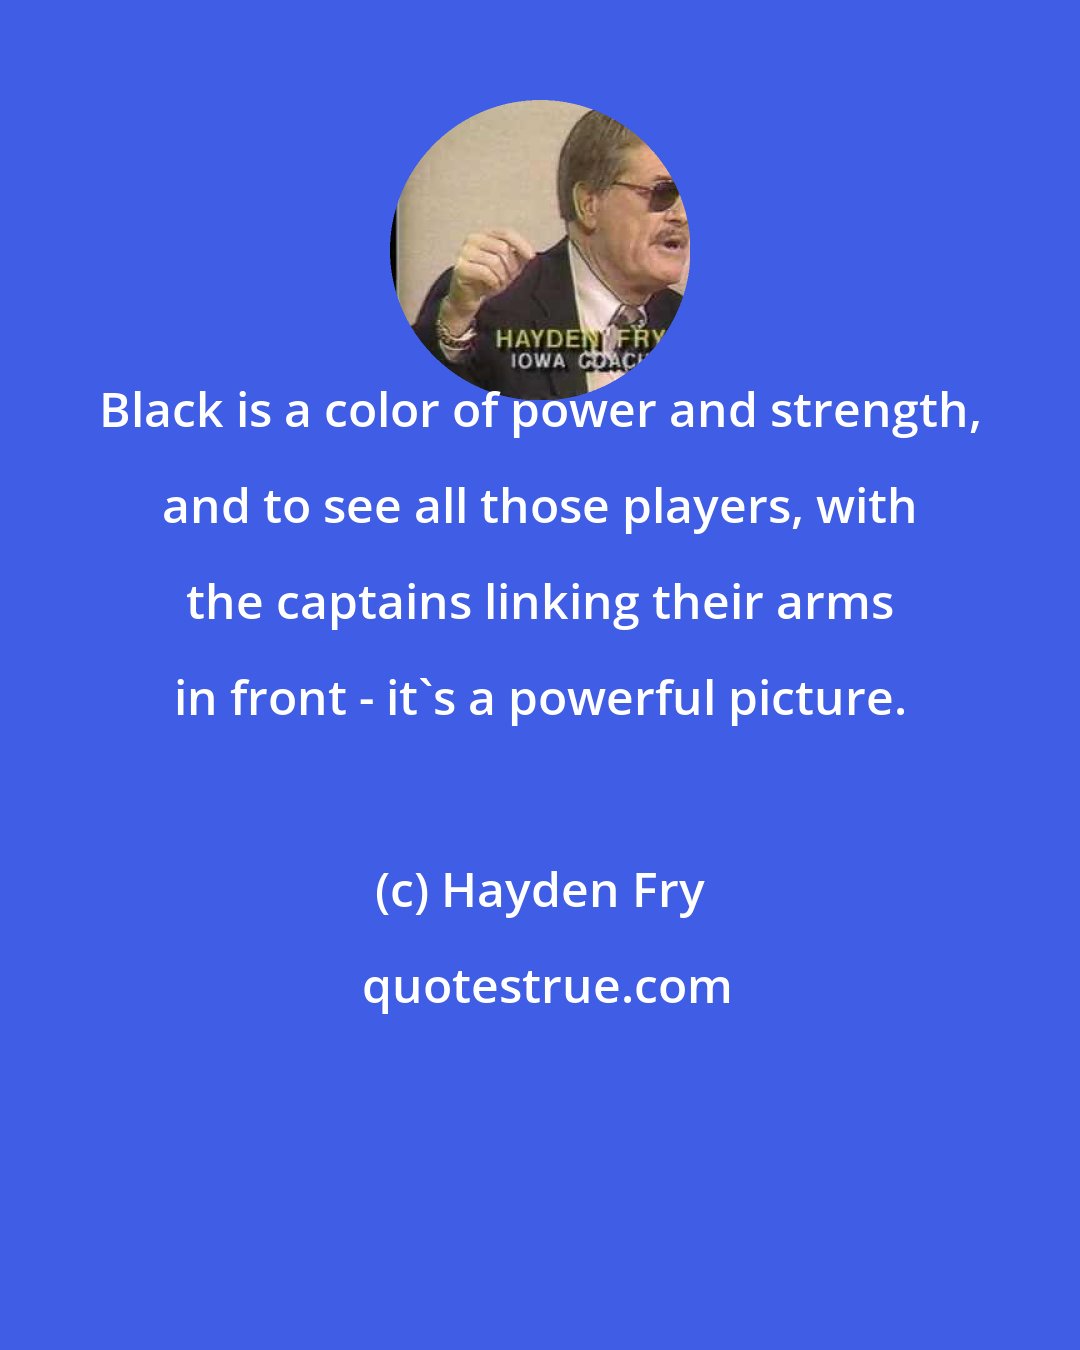 Hayden Fry: Black is a color of power and strength, and to see all those players, with the captains linking their arms in front - it's a powerful picture.